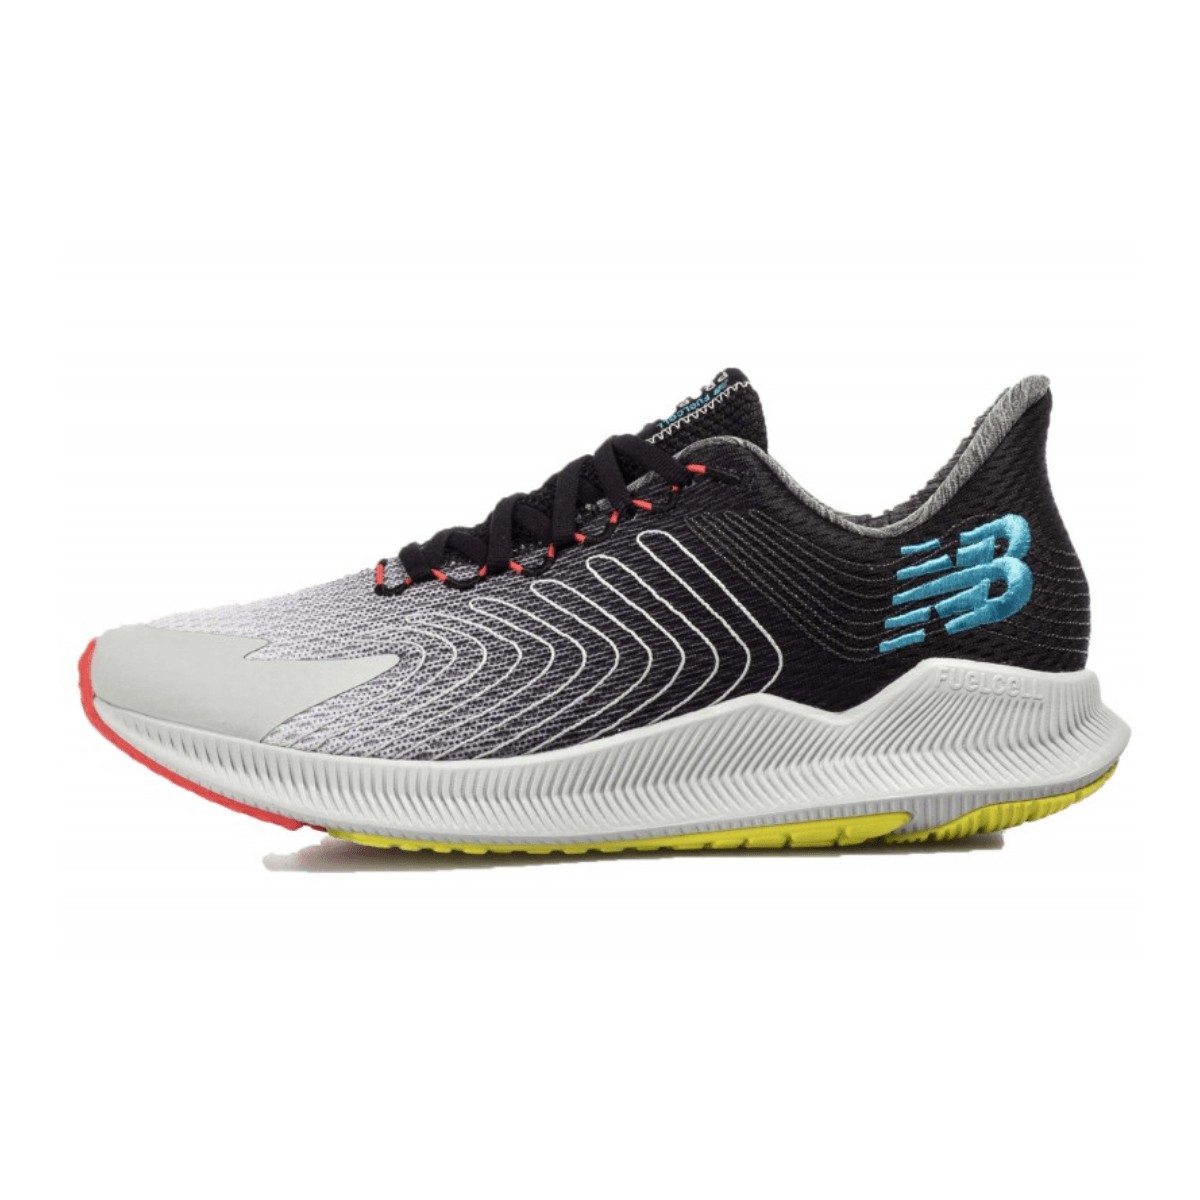 New Balance FuelCell Propel Shoes White Black AW19